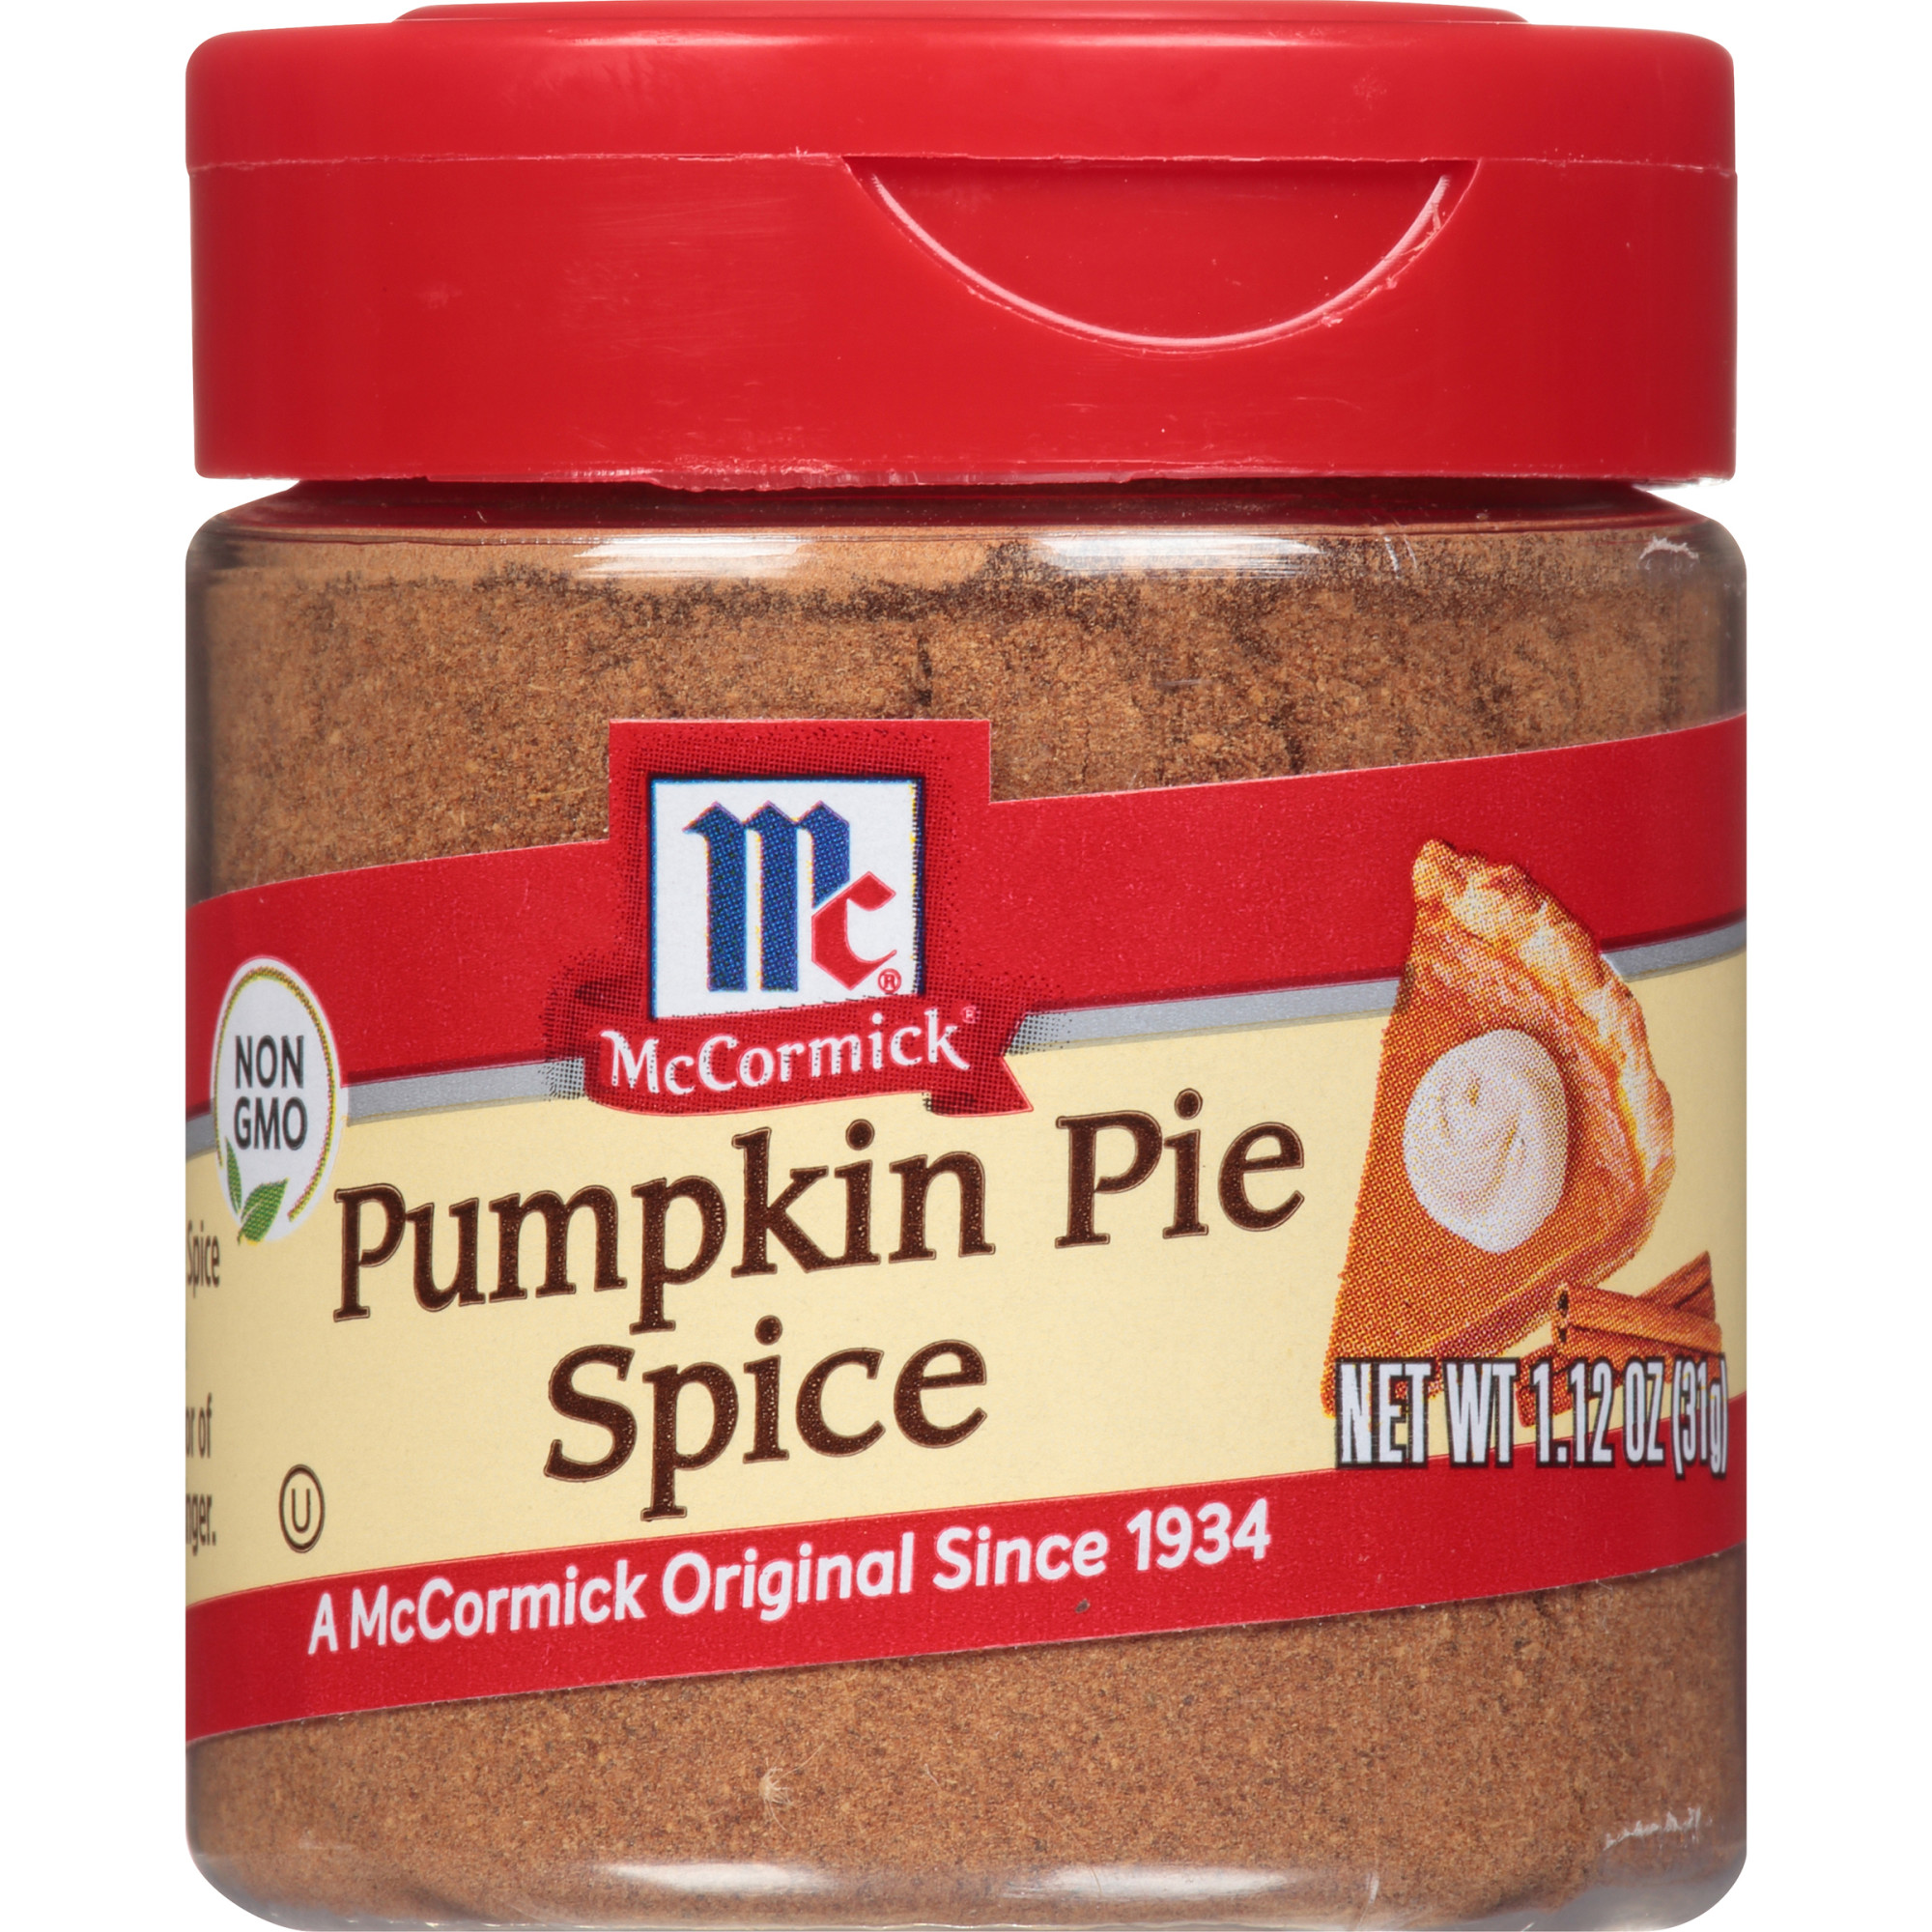 McCormick Pumpkin Pie Spice, 1.12 oz Mixed Spices & Seasonings - image 1 of 12